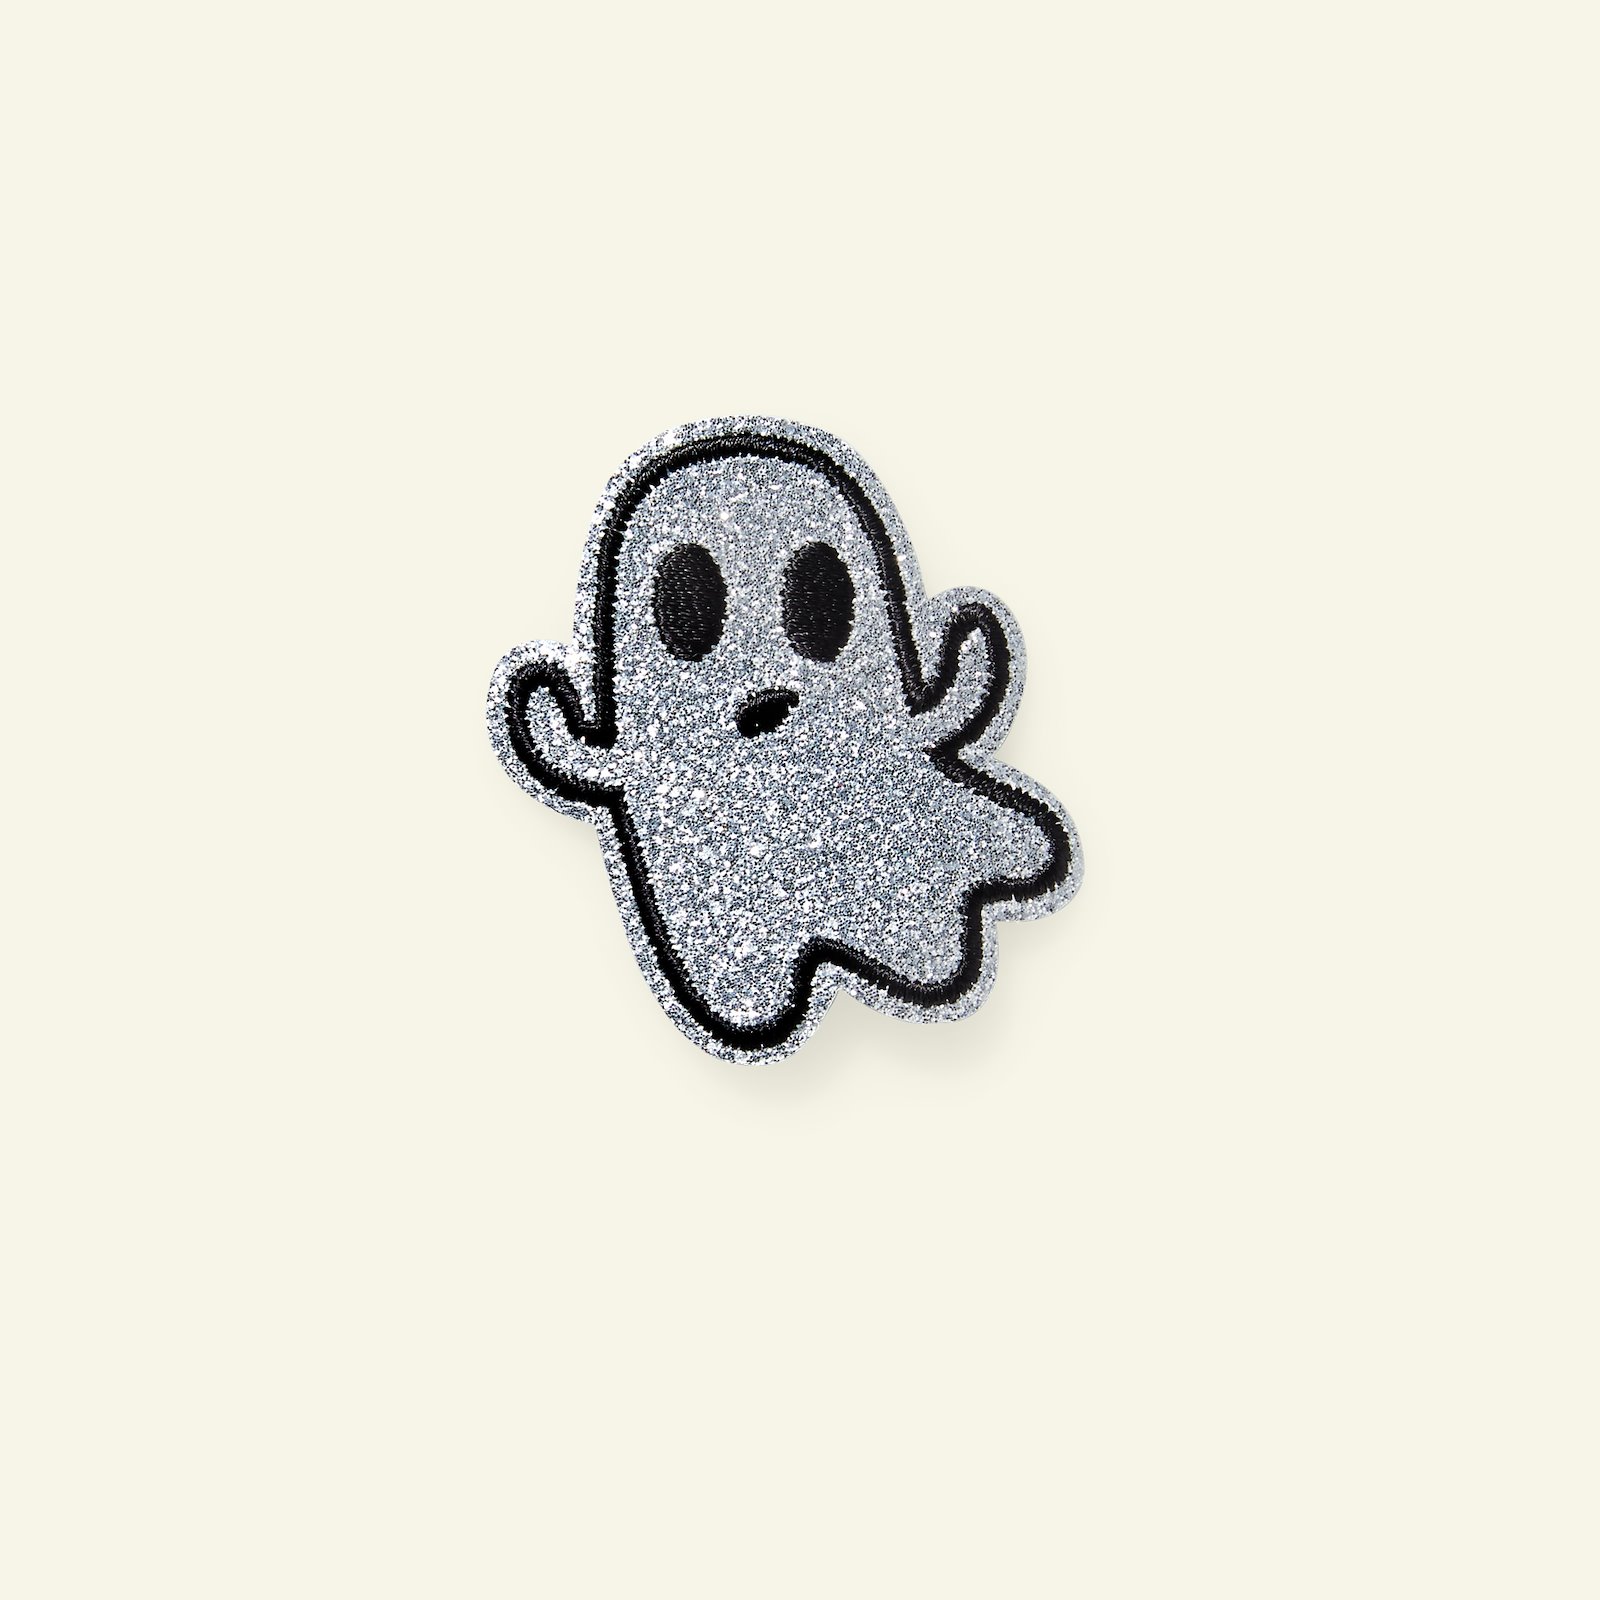 Patch ghost 45x51mm silver glitter 24989_pack